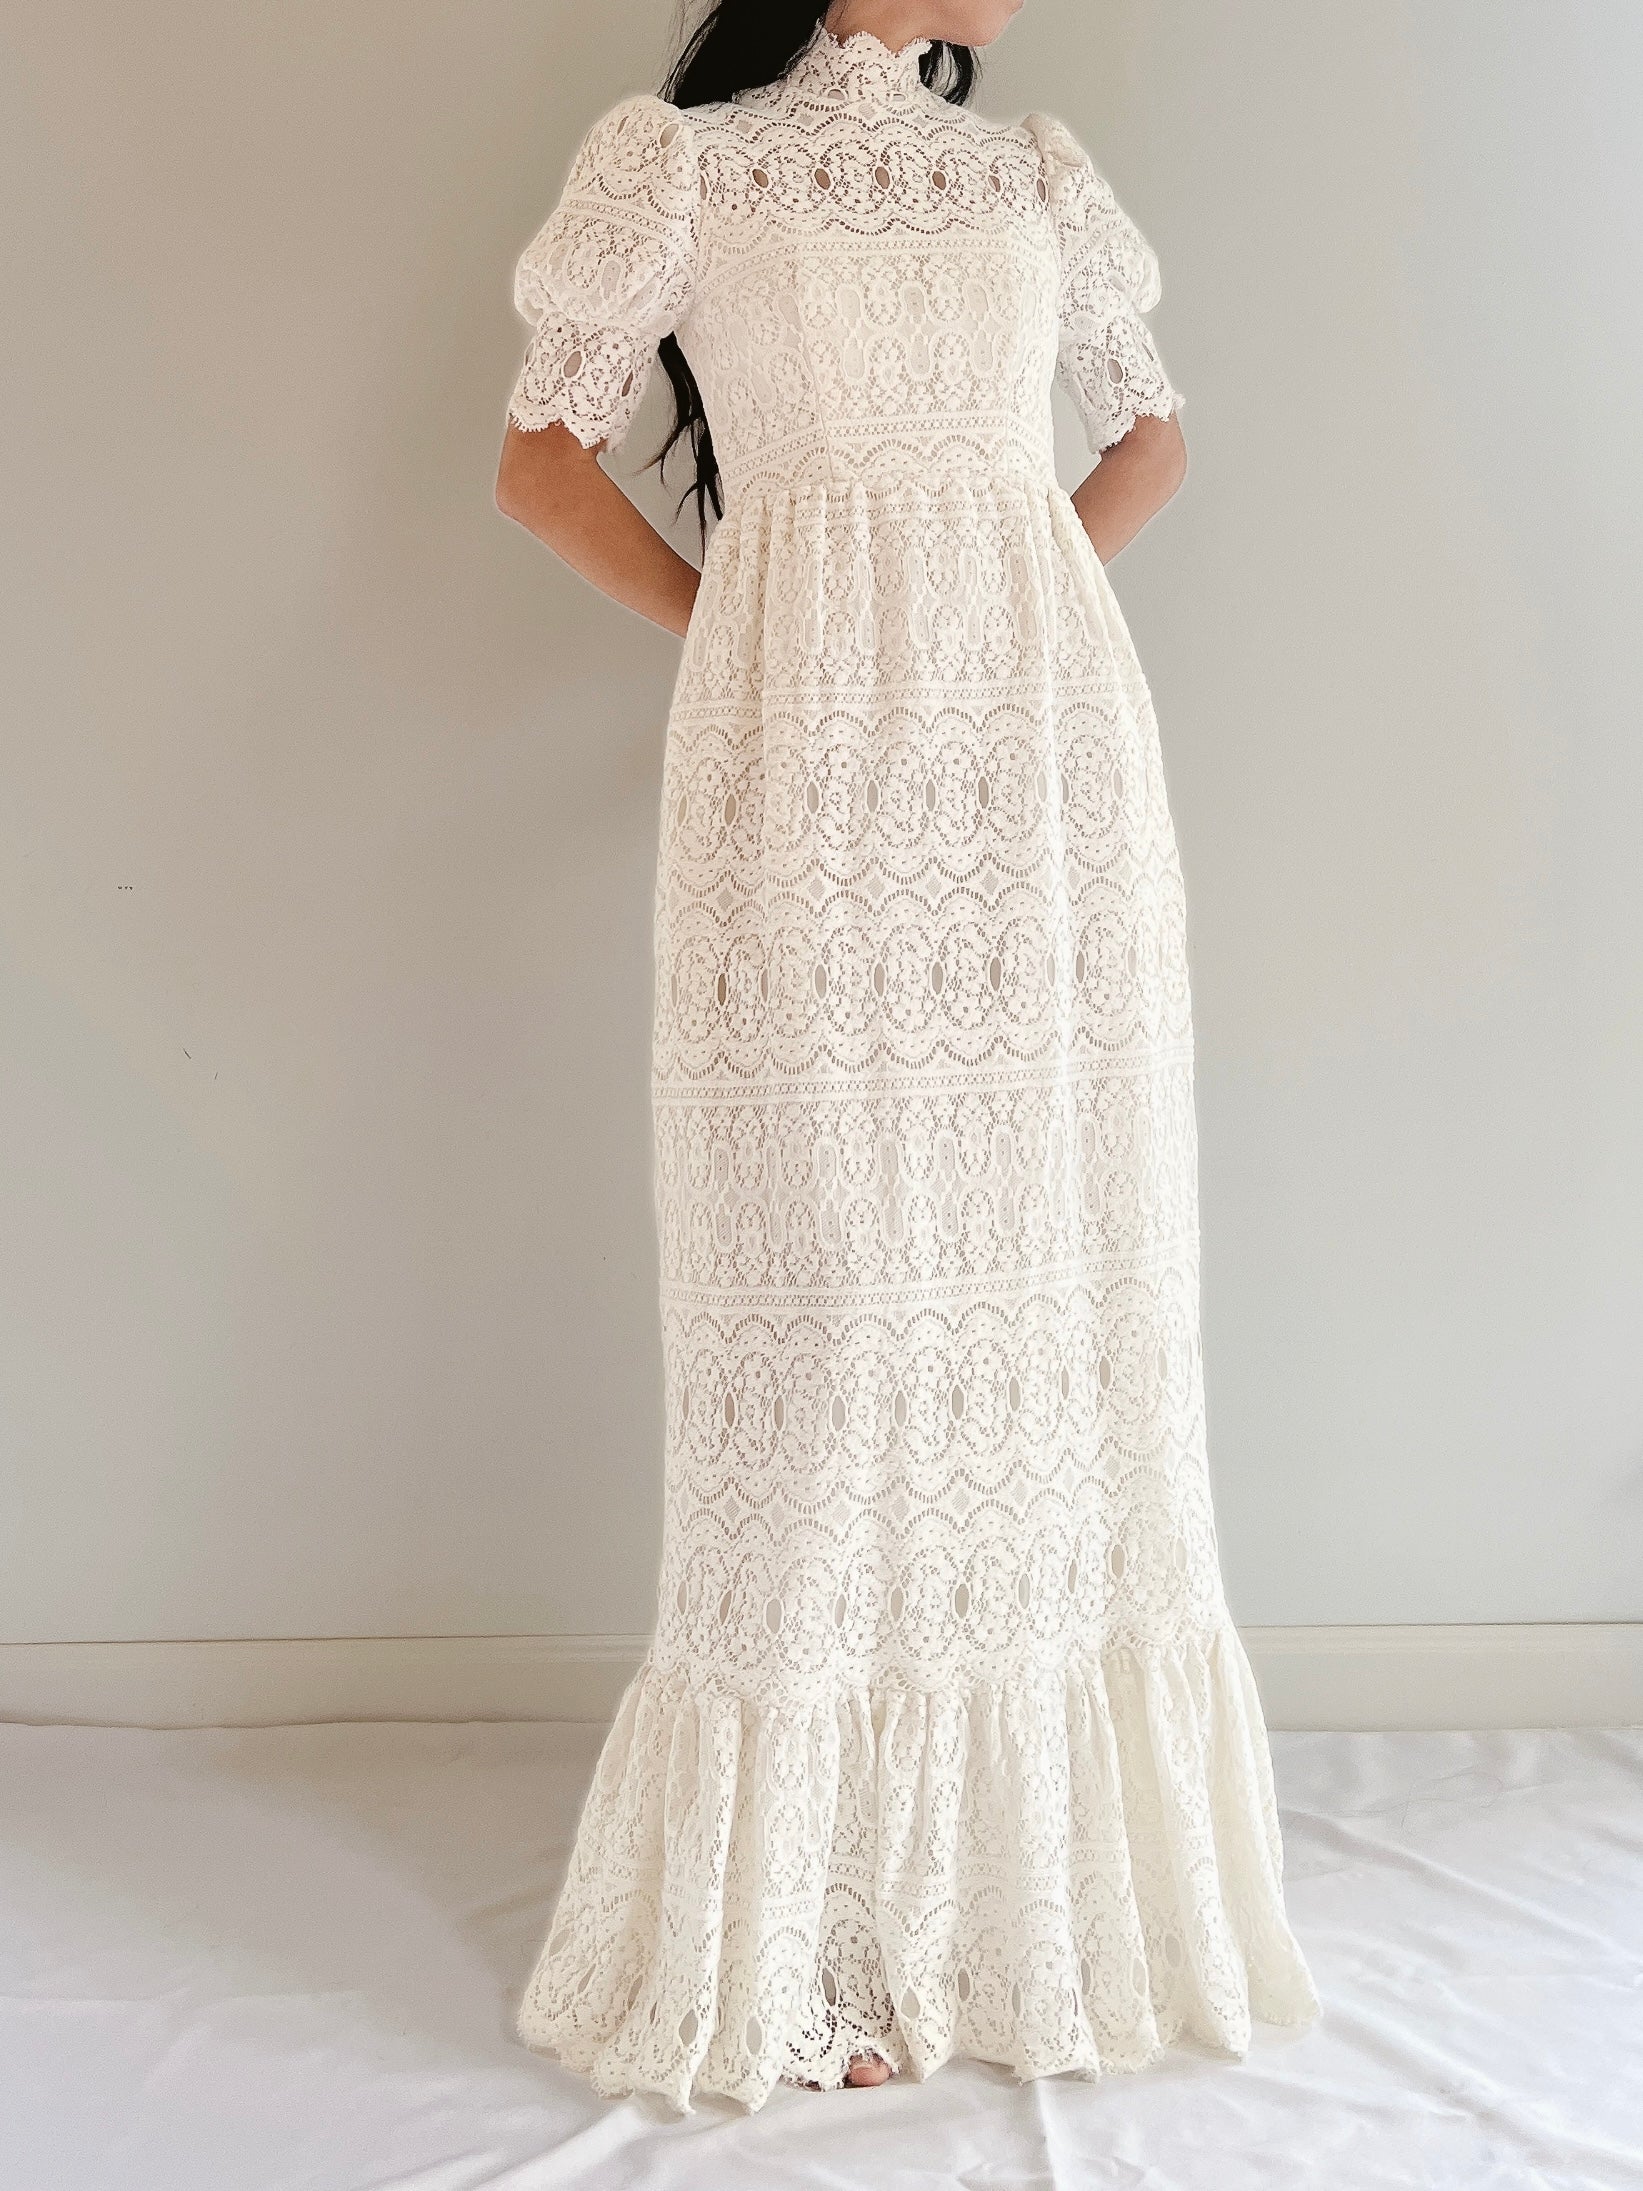 Vintage Puff Sleeve Lace Dress - XS